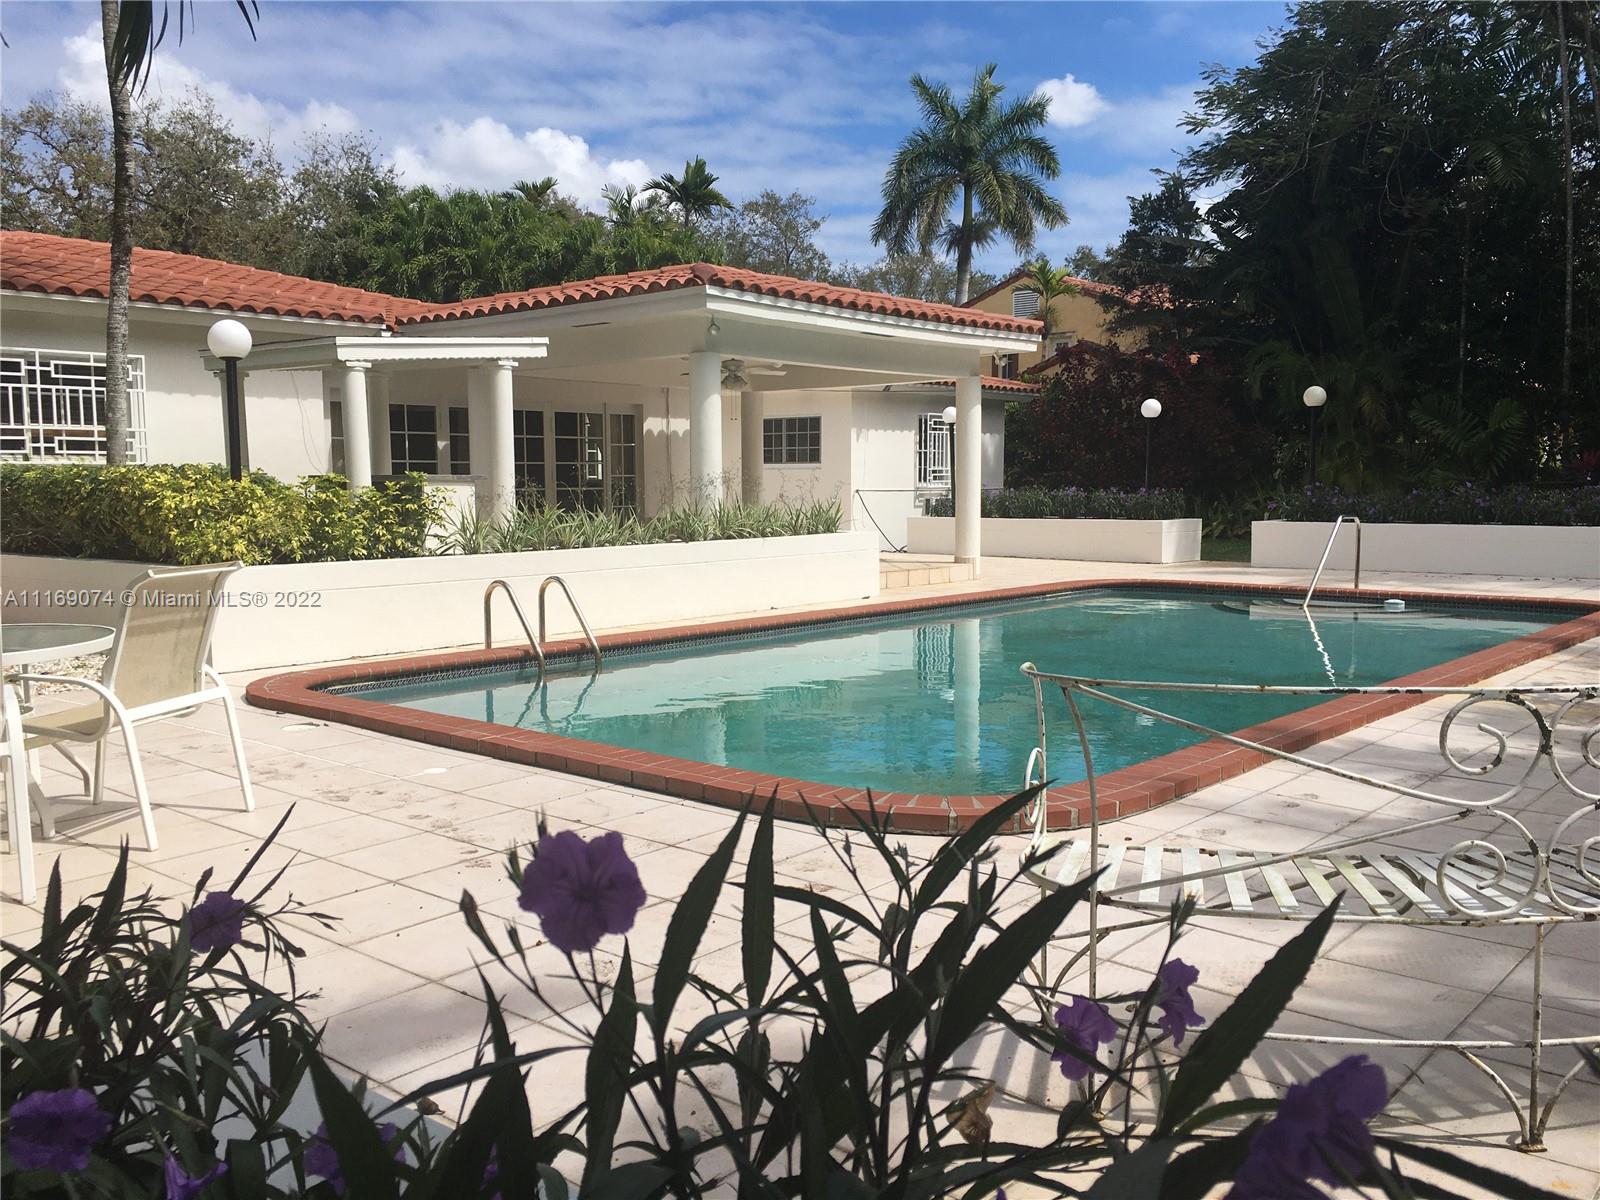 Come join the homes on this exclusive stretch of Coral Way, lined by its famous tree canopy.  Renovate, add or build your dream home on this deep 15,000 square foot lot that is walled and gated.  Great pool and patio area ready for entertaining.  Centrally located with easy access to Downtown Coral Gables, shops, restaurants, golf courses, and much more.